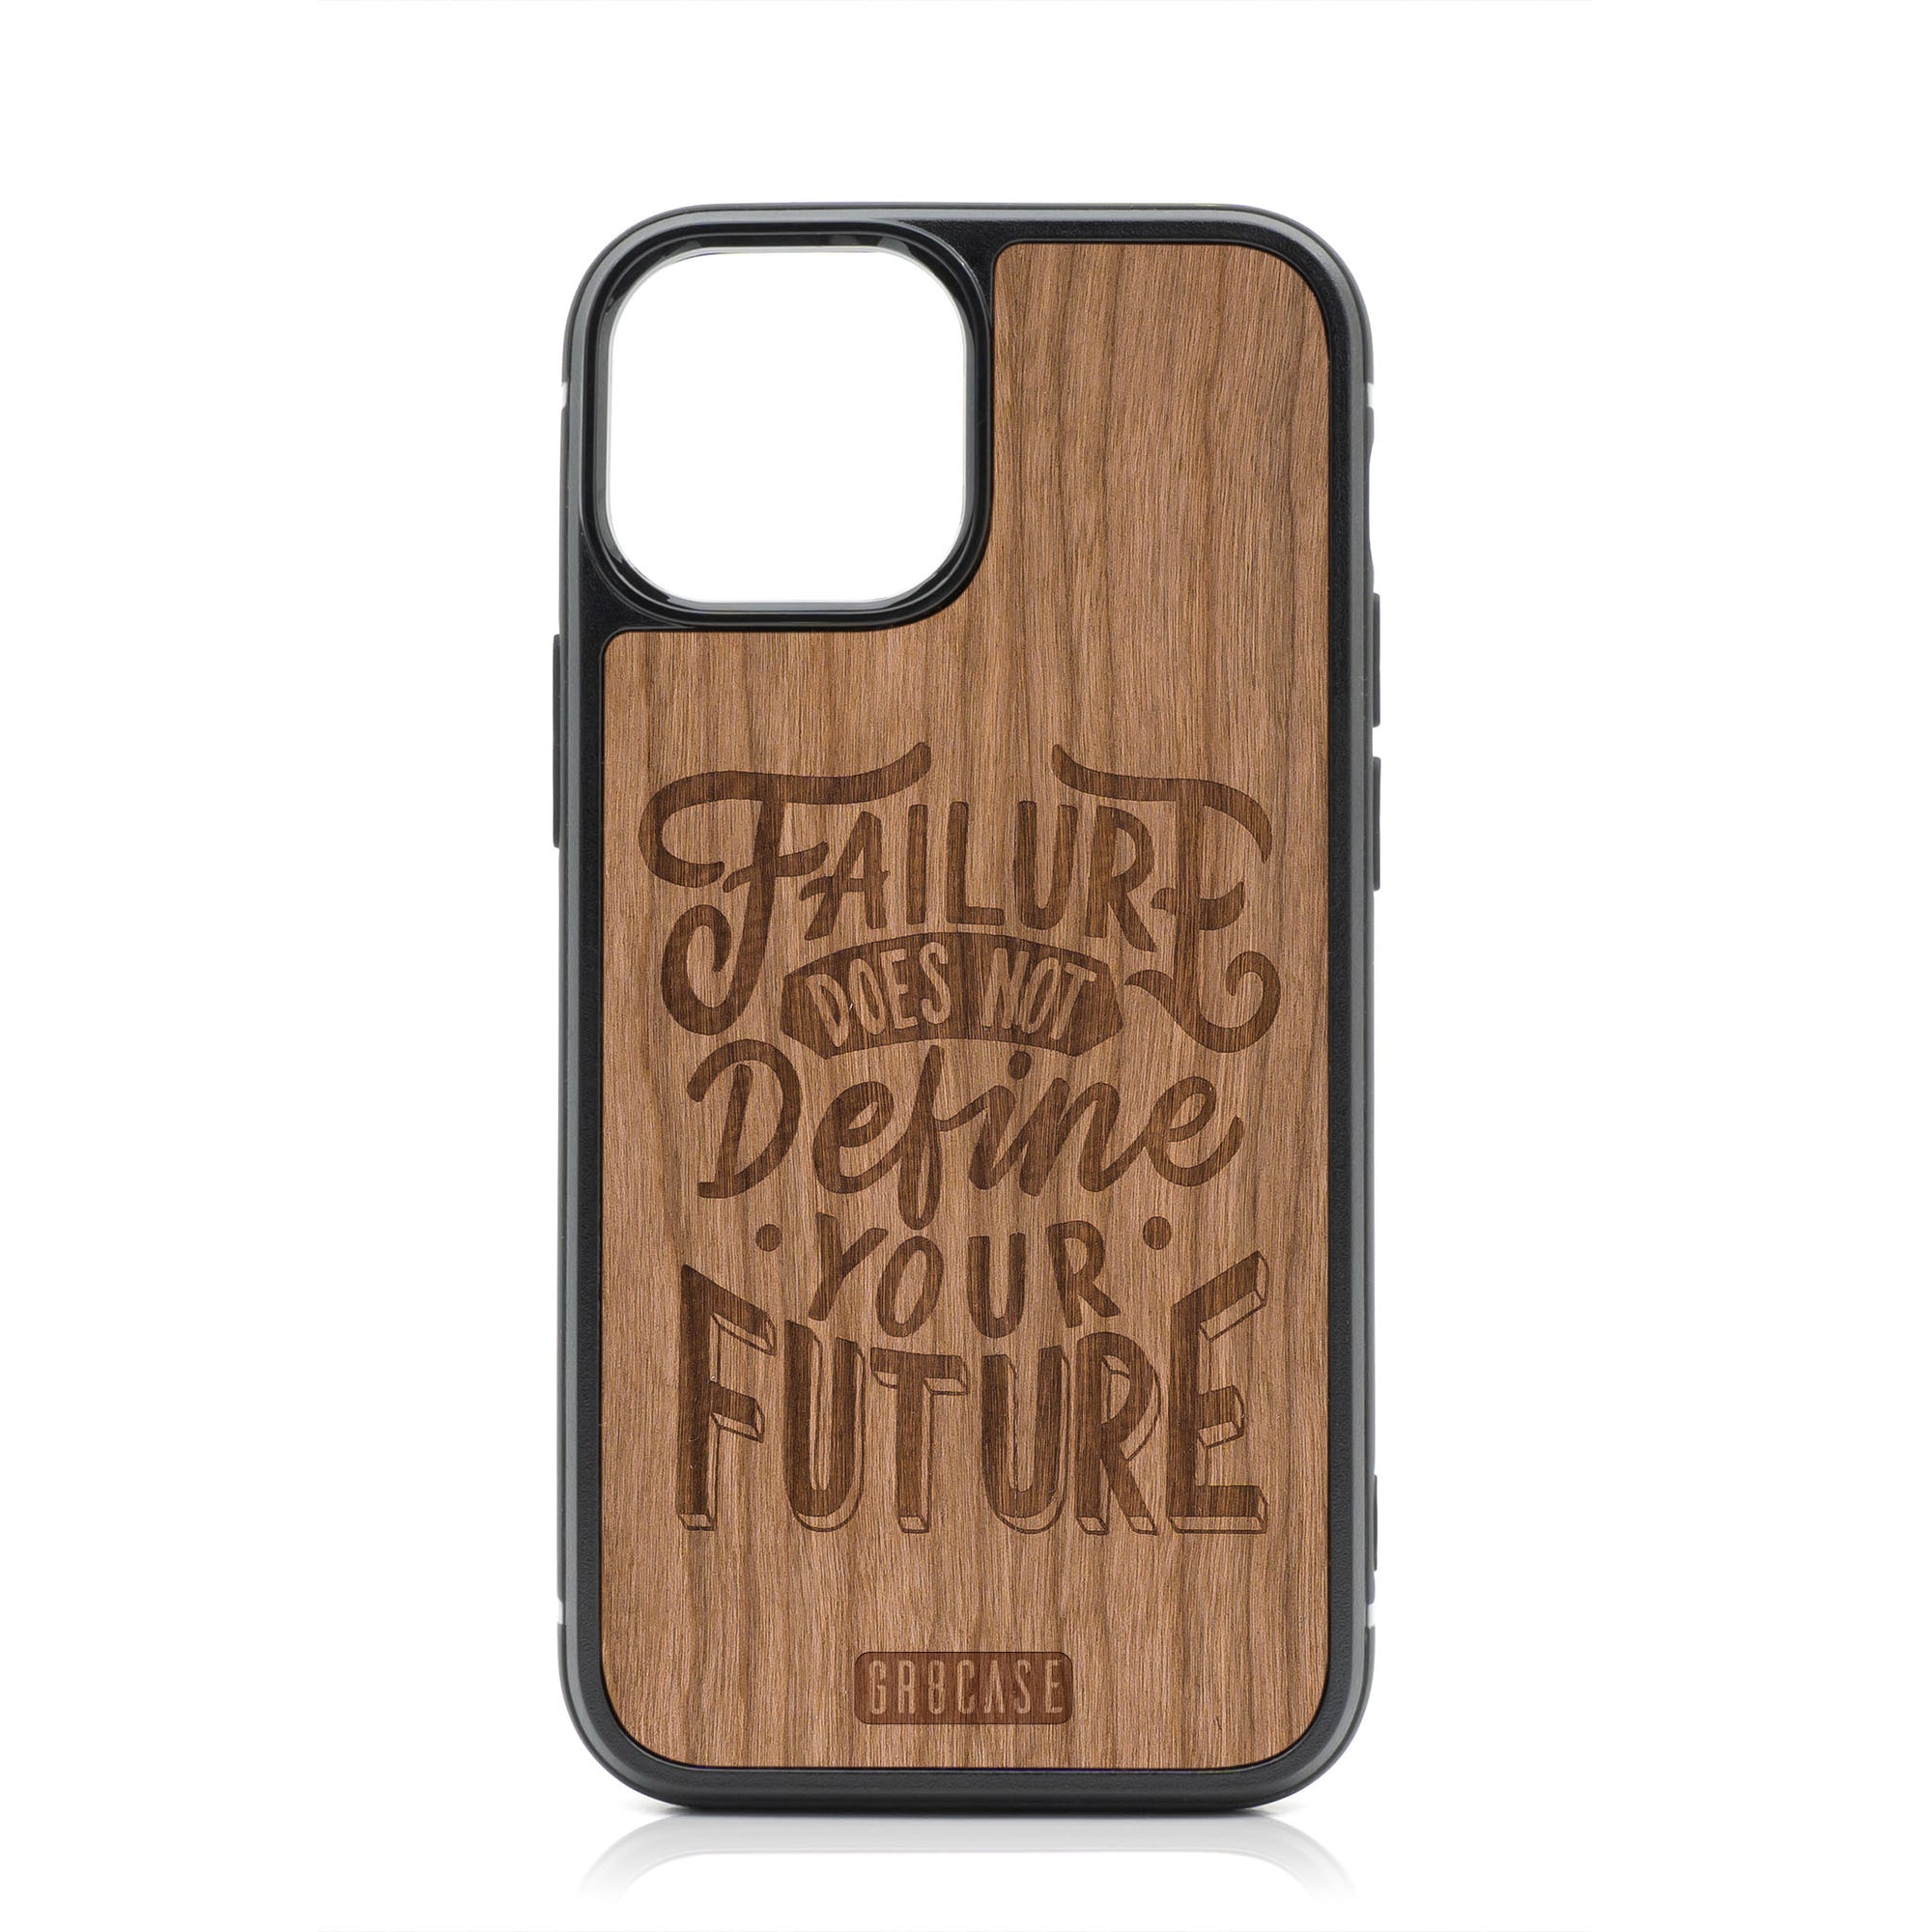 Failure Does Not Define Your Future Design Wood Case For iPhone 13 Mini